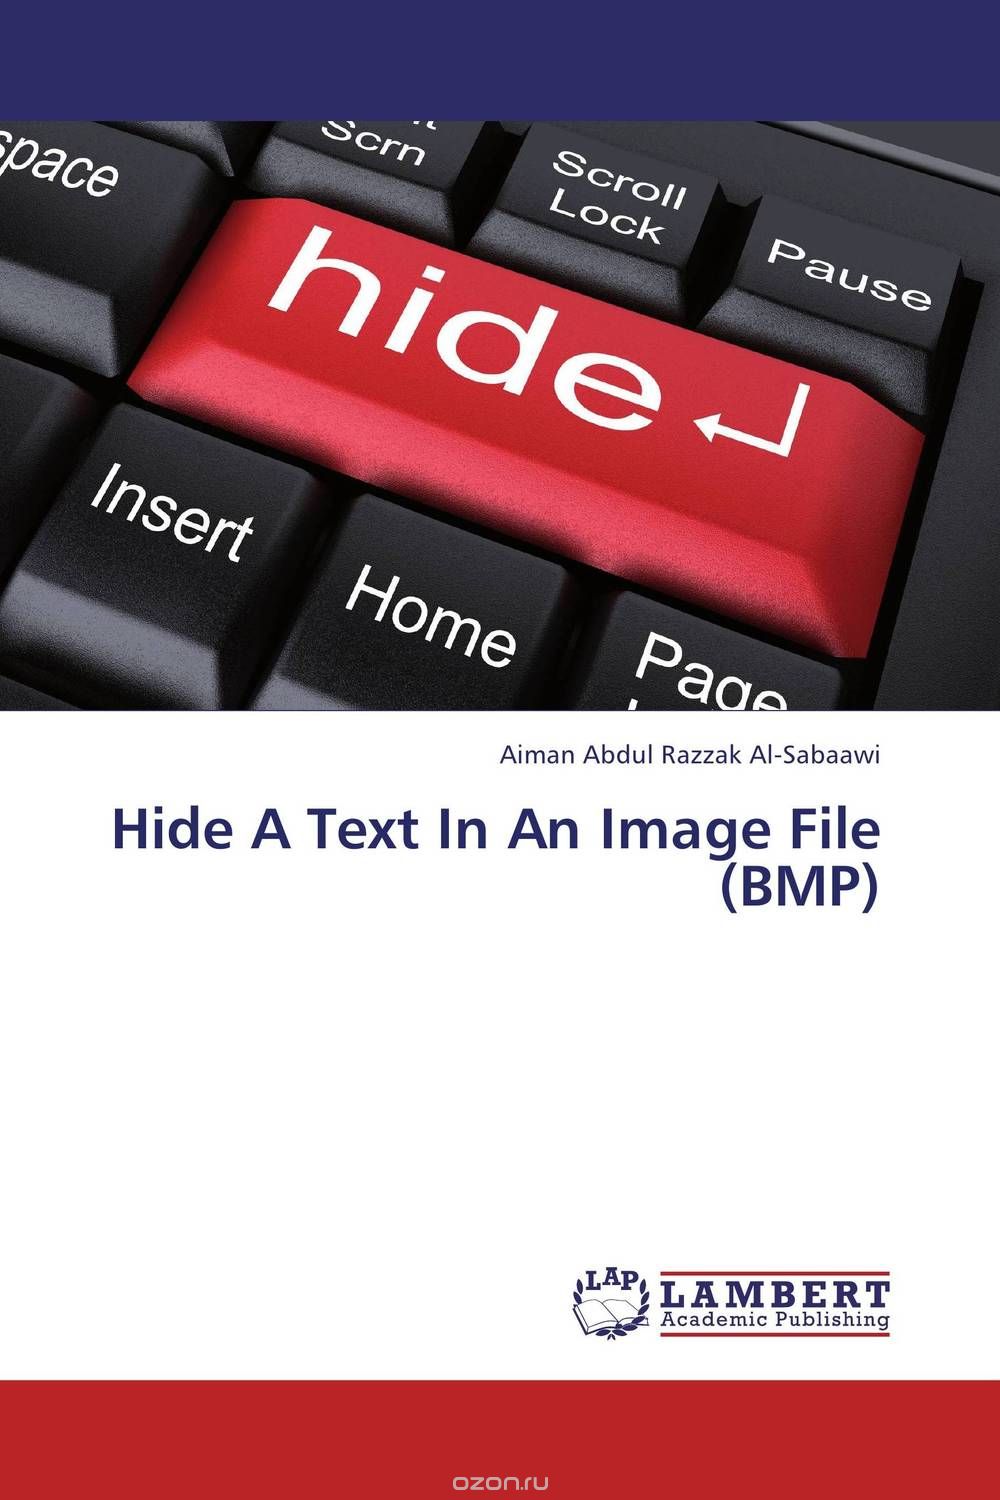 Скачать книгу "Hide A Text In An Image File  (BMP)"